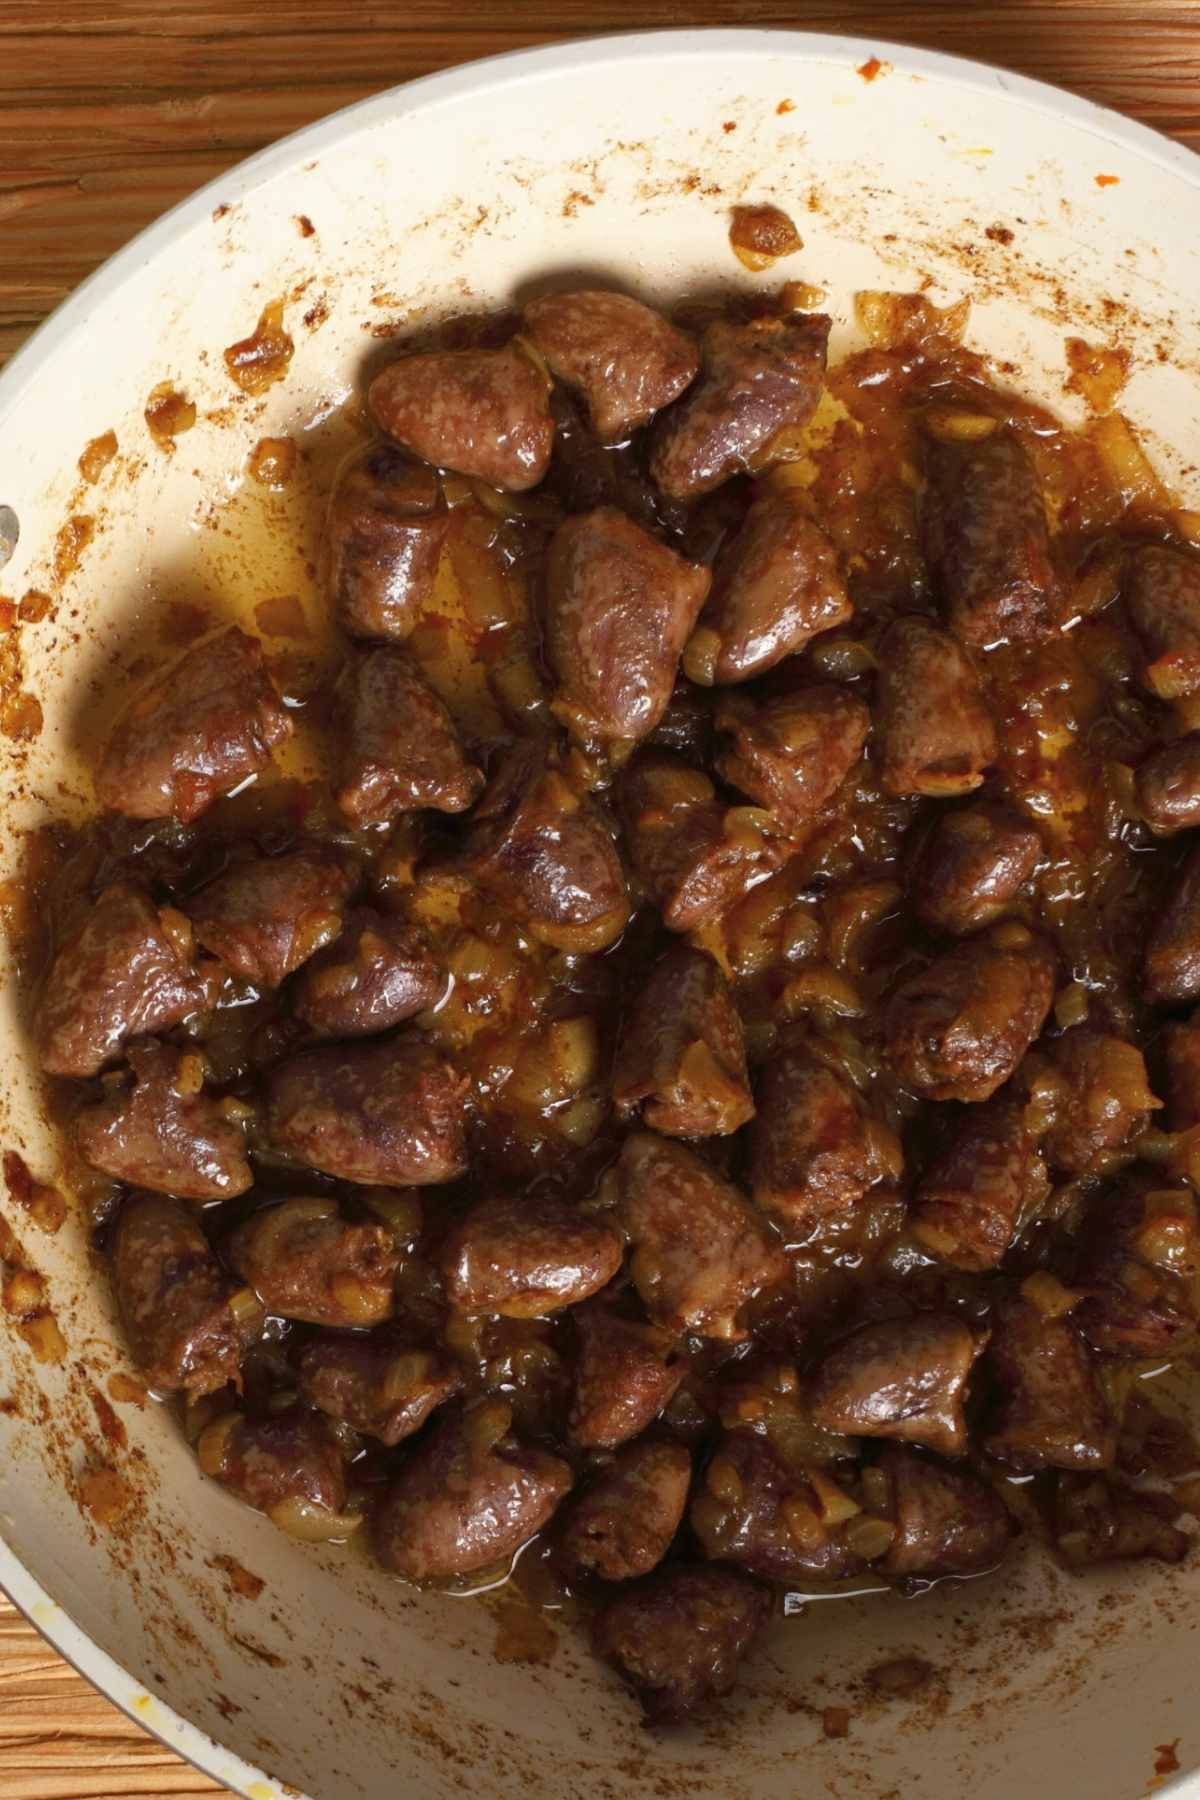 Economical and tasty, Chicken Hearts are quick and easy to make. They’re also an excellent source of protein and can be served alongside rice, potatoes, and veggies for a delicious meal.